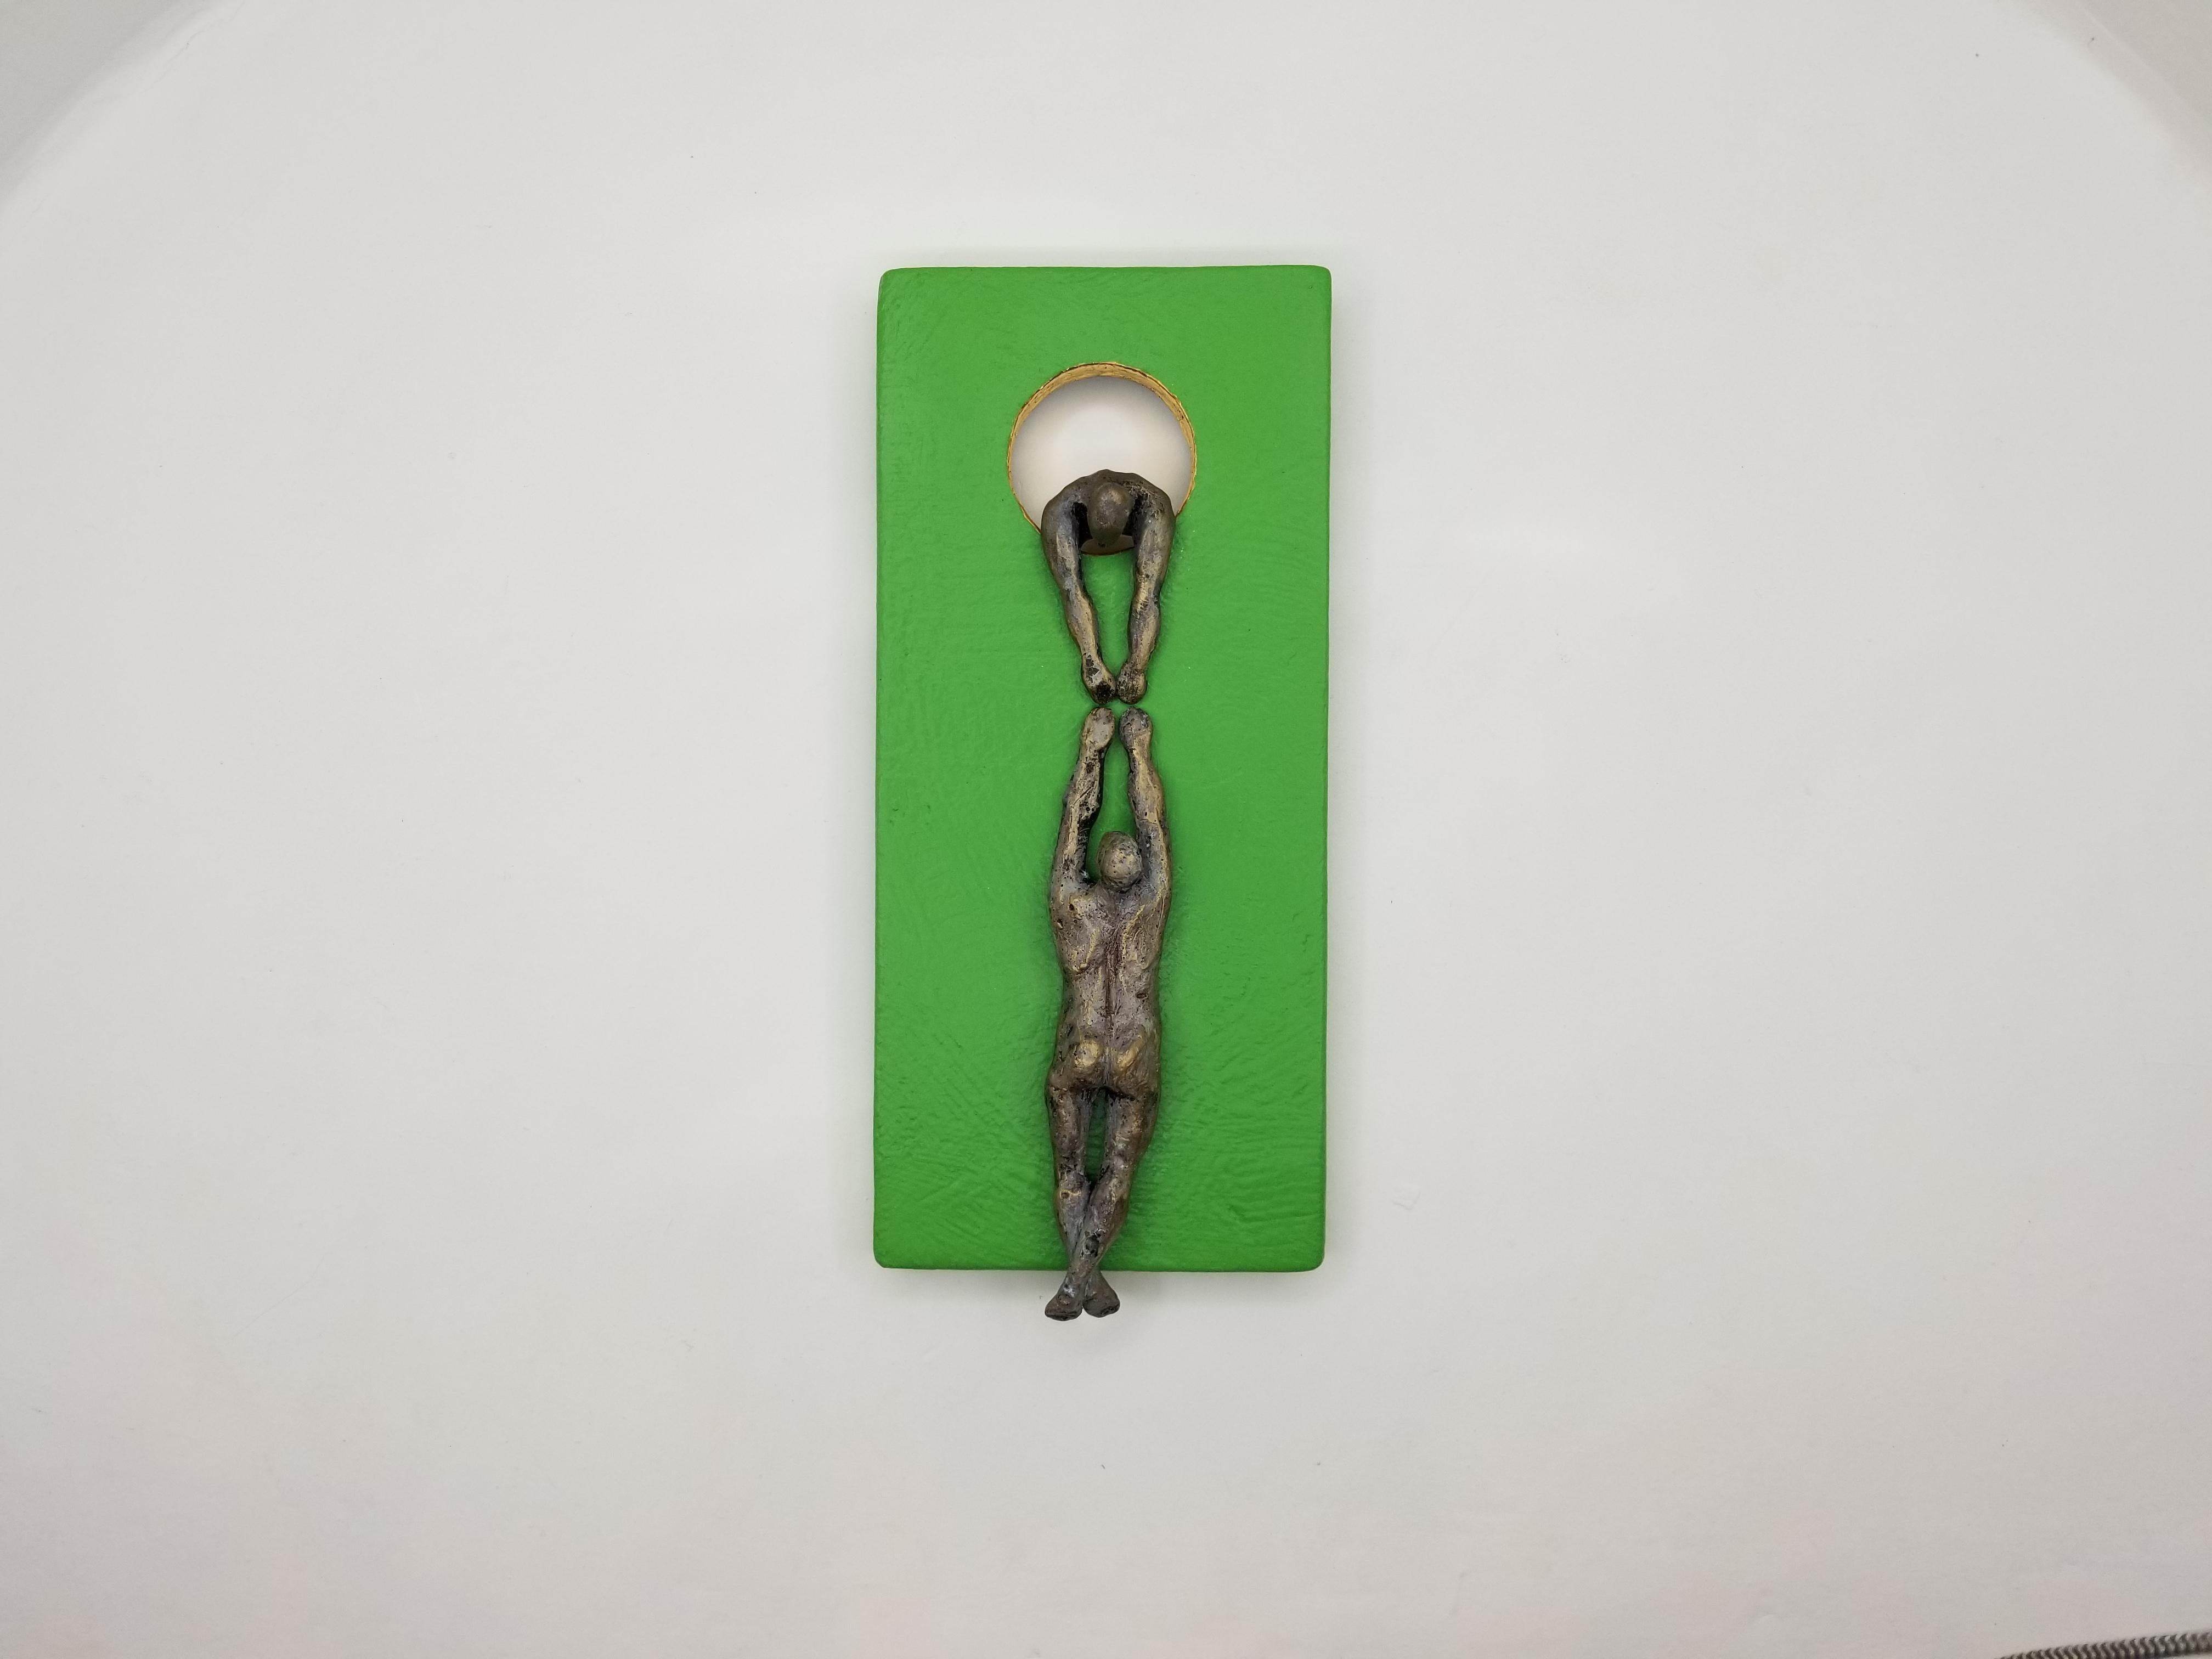 <p>Artist Comments<br>Artist Human Yelitza Diaz demonstrates two figures, one helping the other climb a green wooden structure. She creates the figures with resin and paints their bodies bronze for a metallic impression. The carved hole depicts a